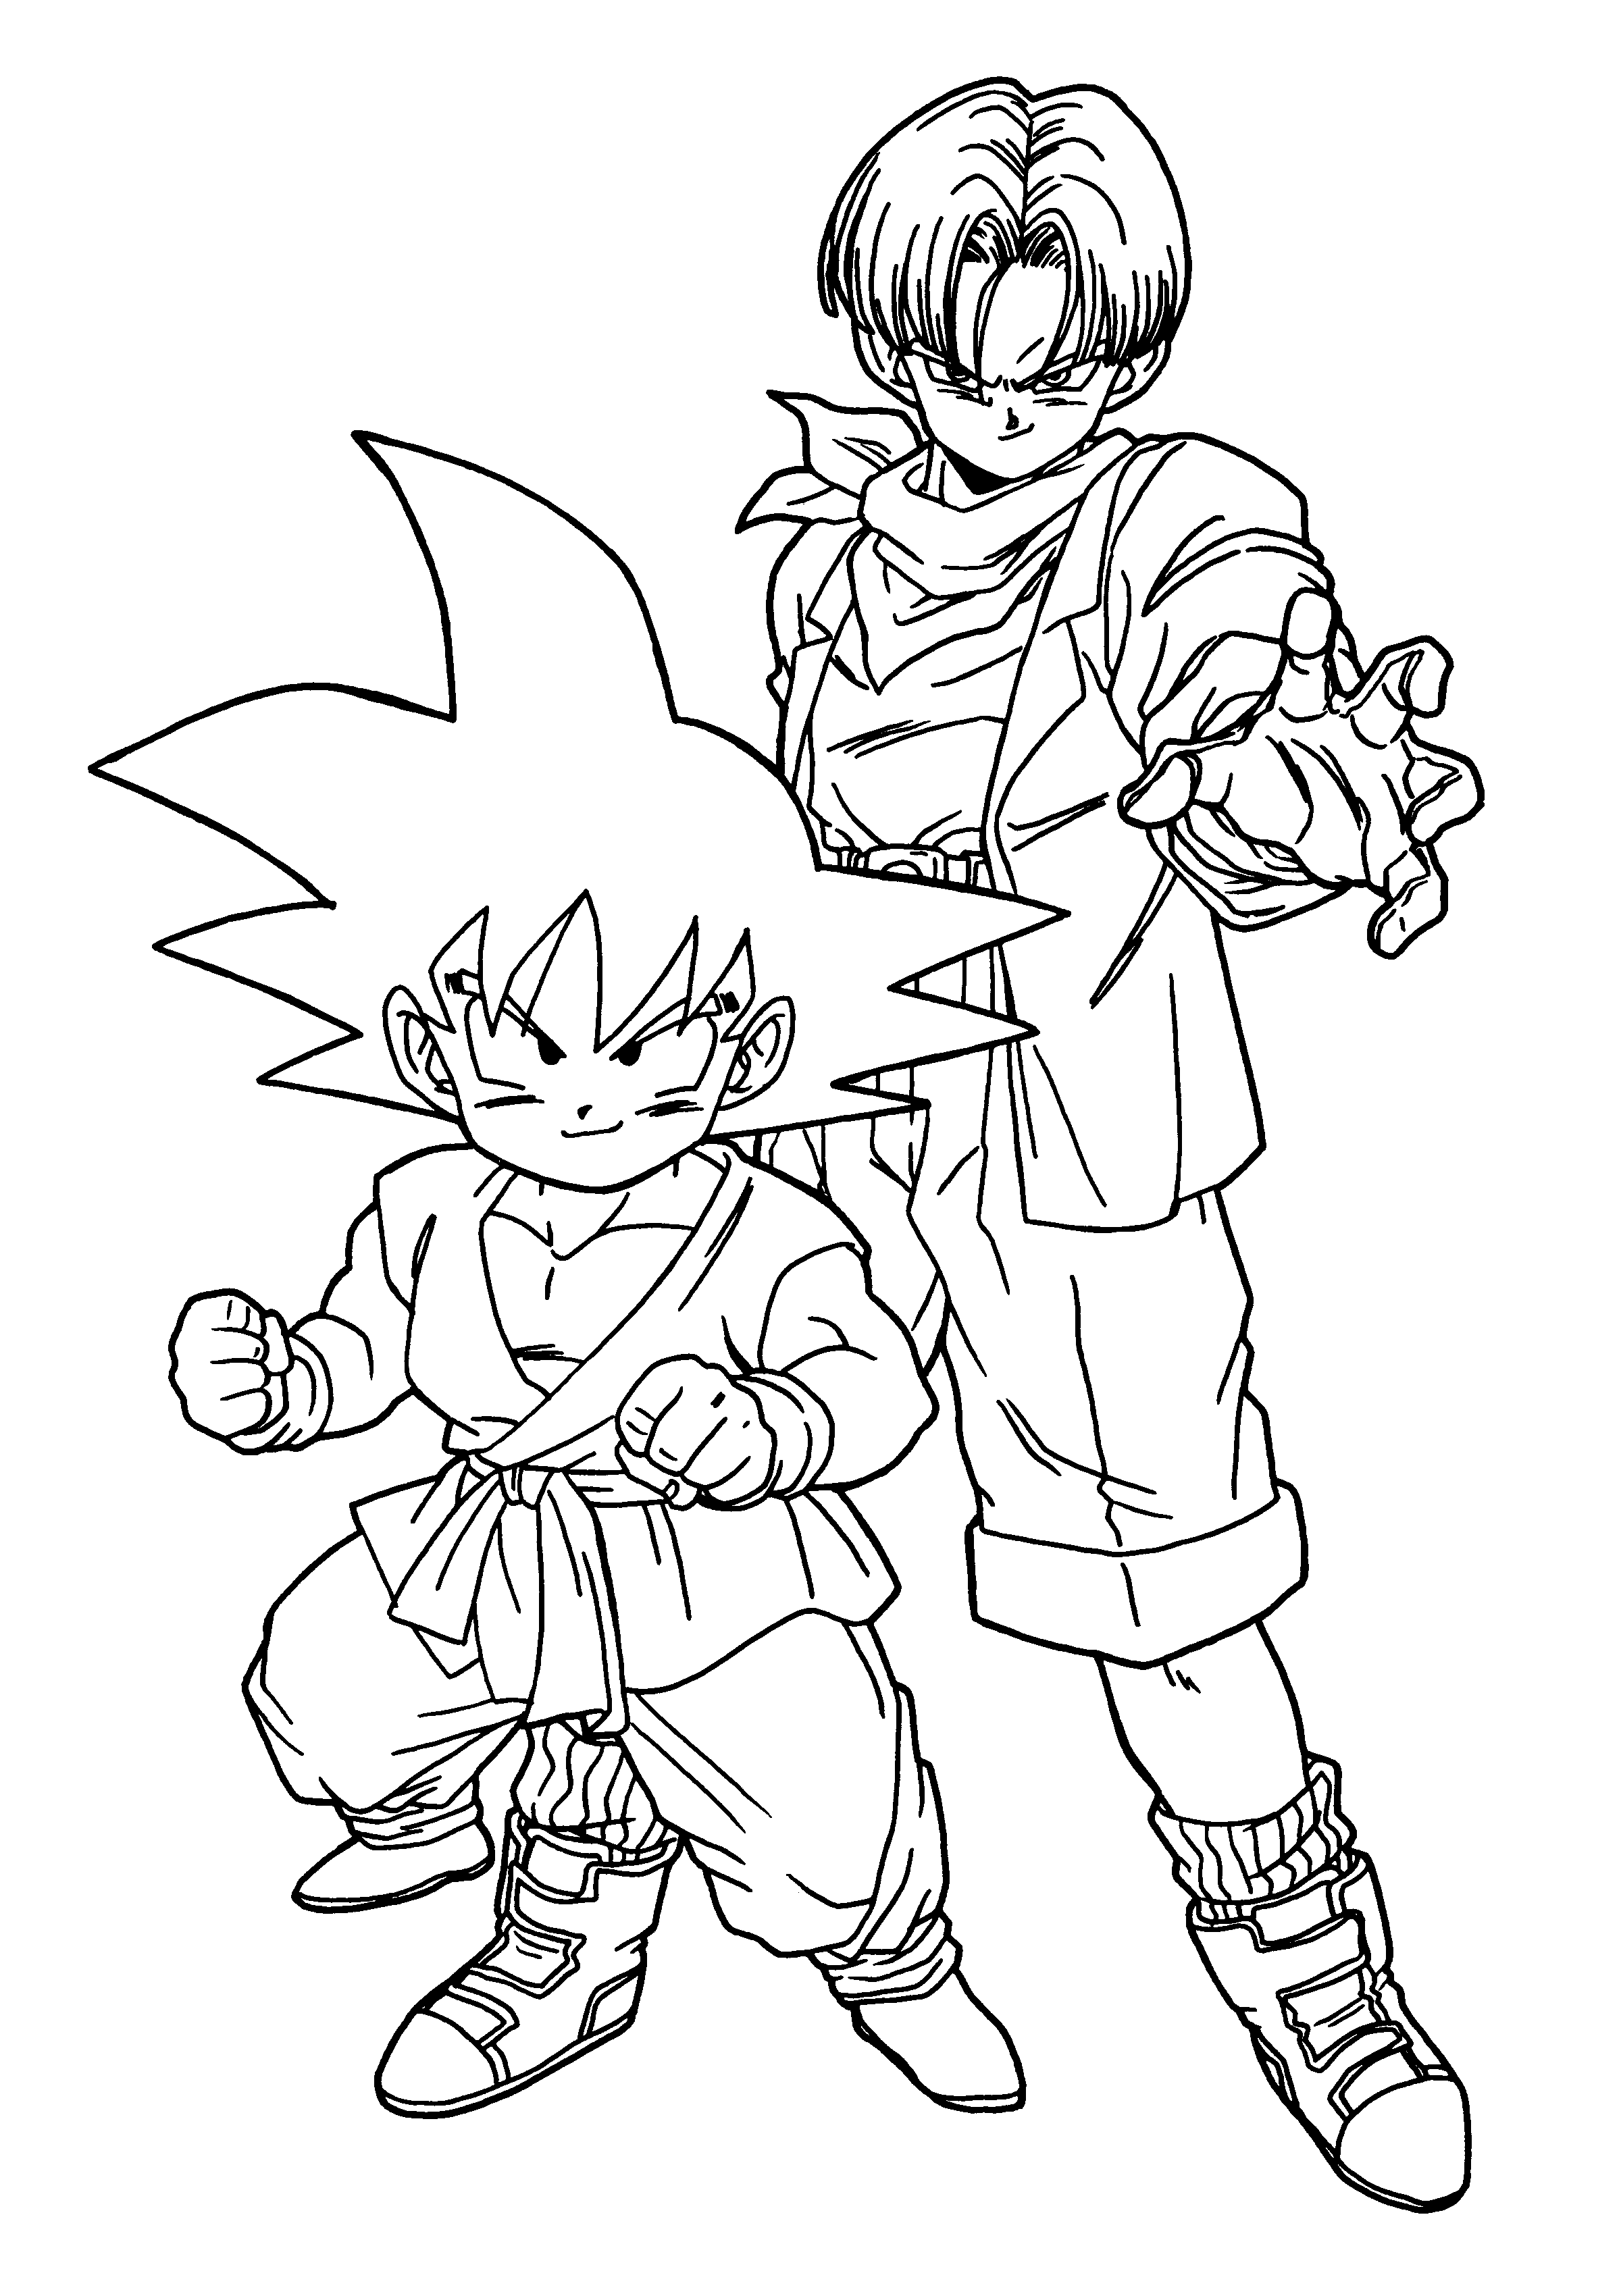 Drawing Dragon Ball Z Cartoons Printable Coloring Pages